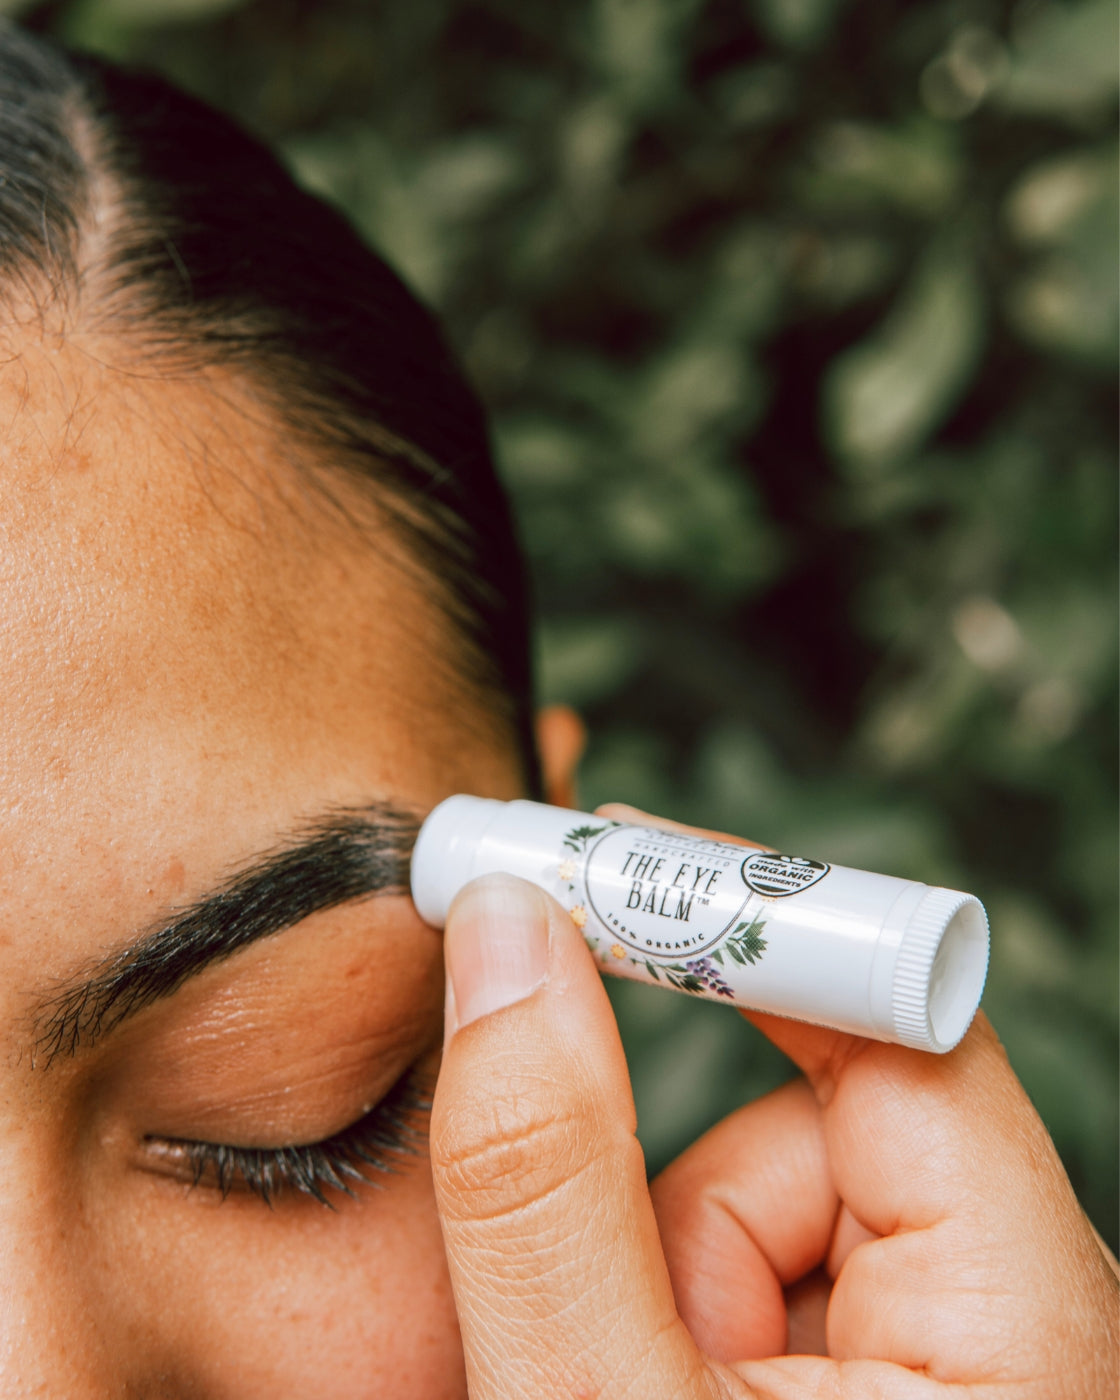 A close-up shot of a woman applying The Eye Balm™ to her eyebrows.